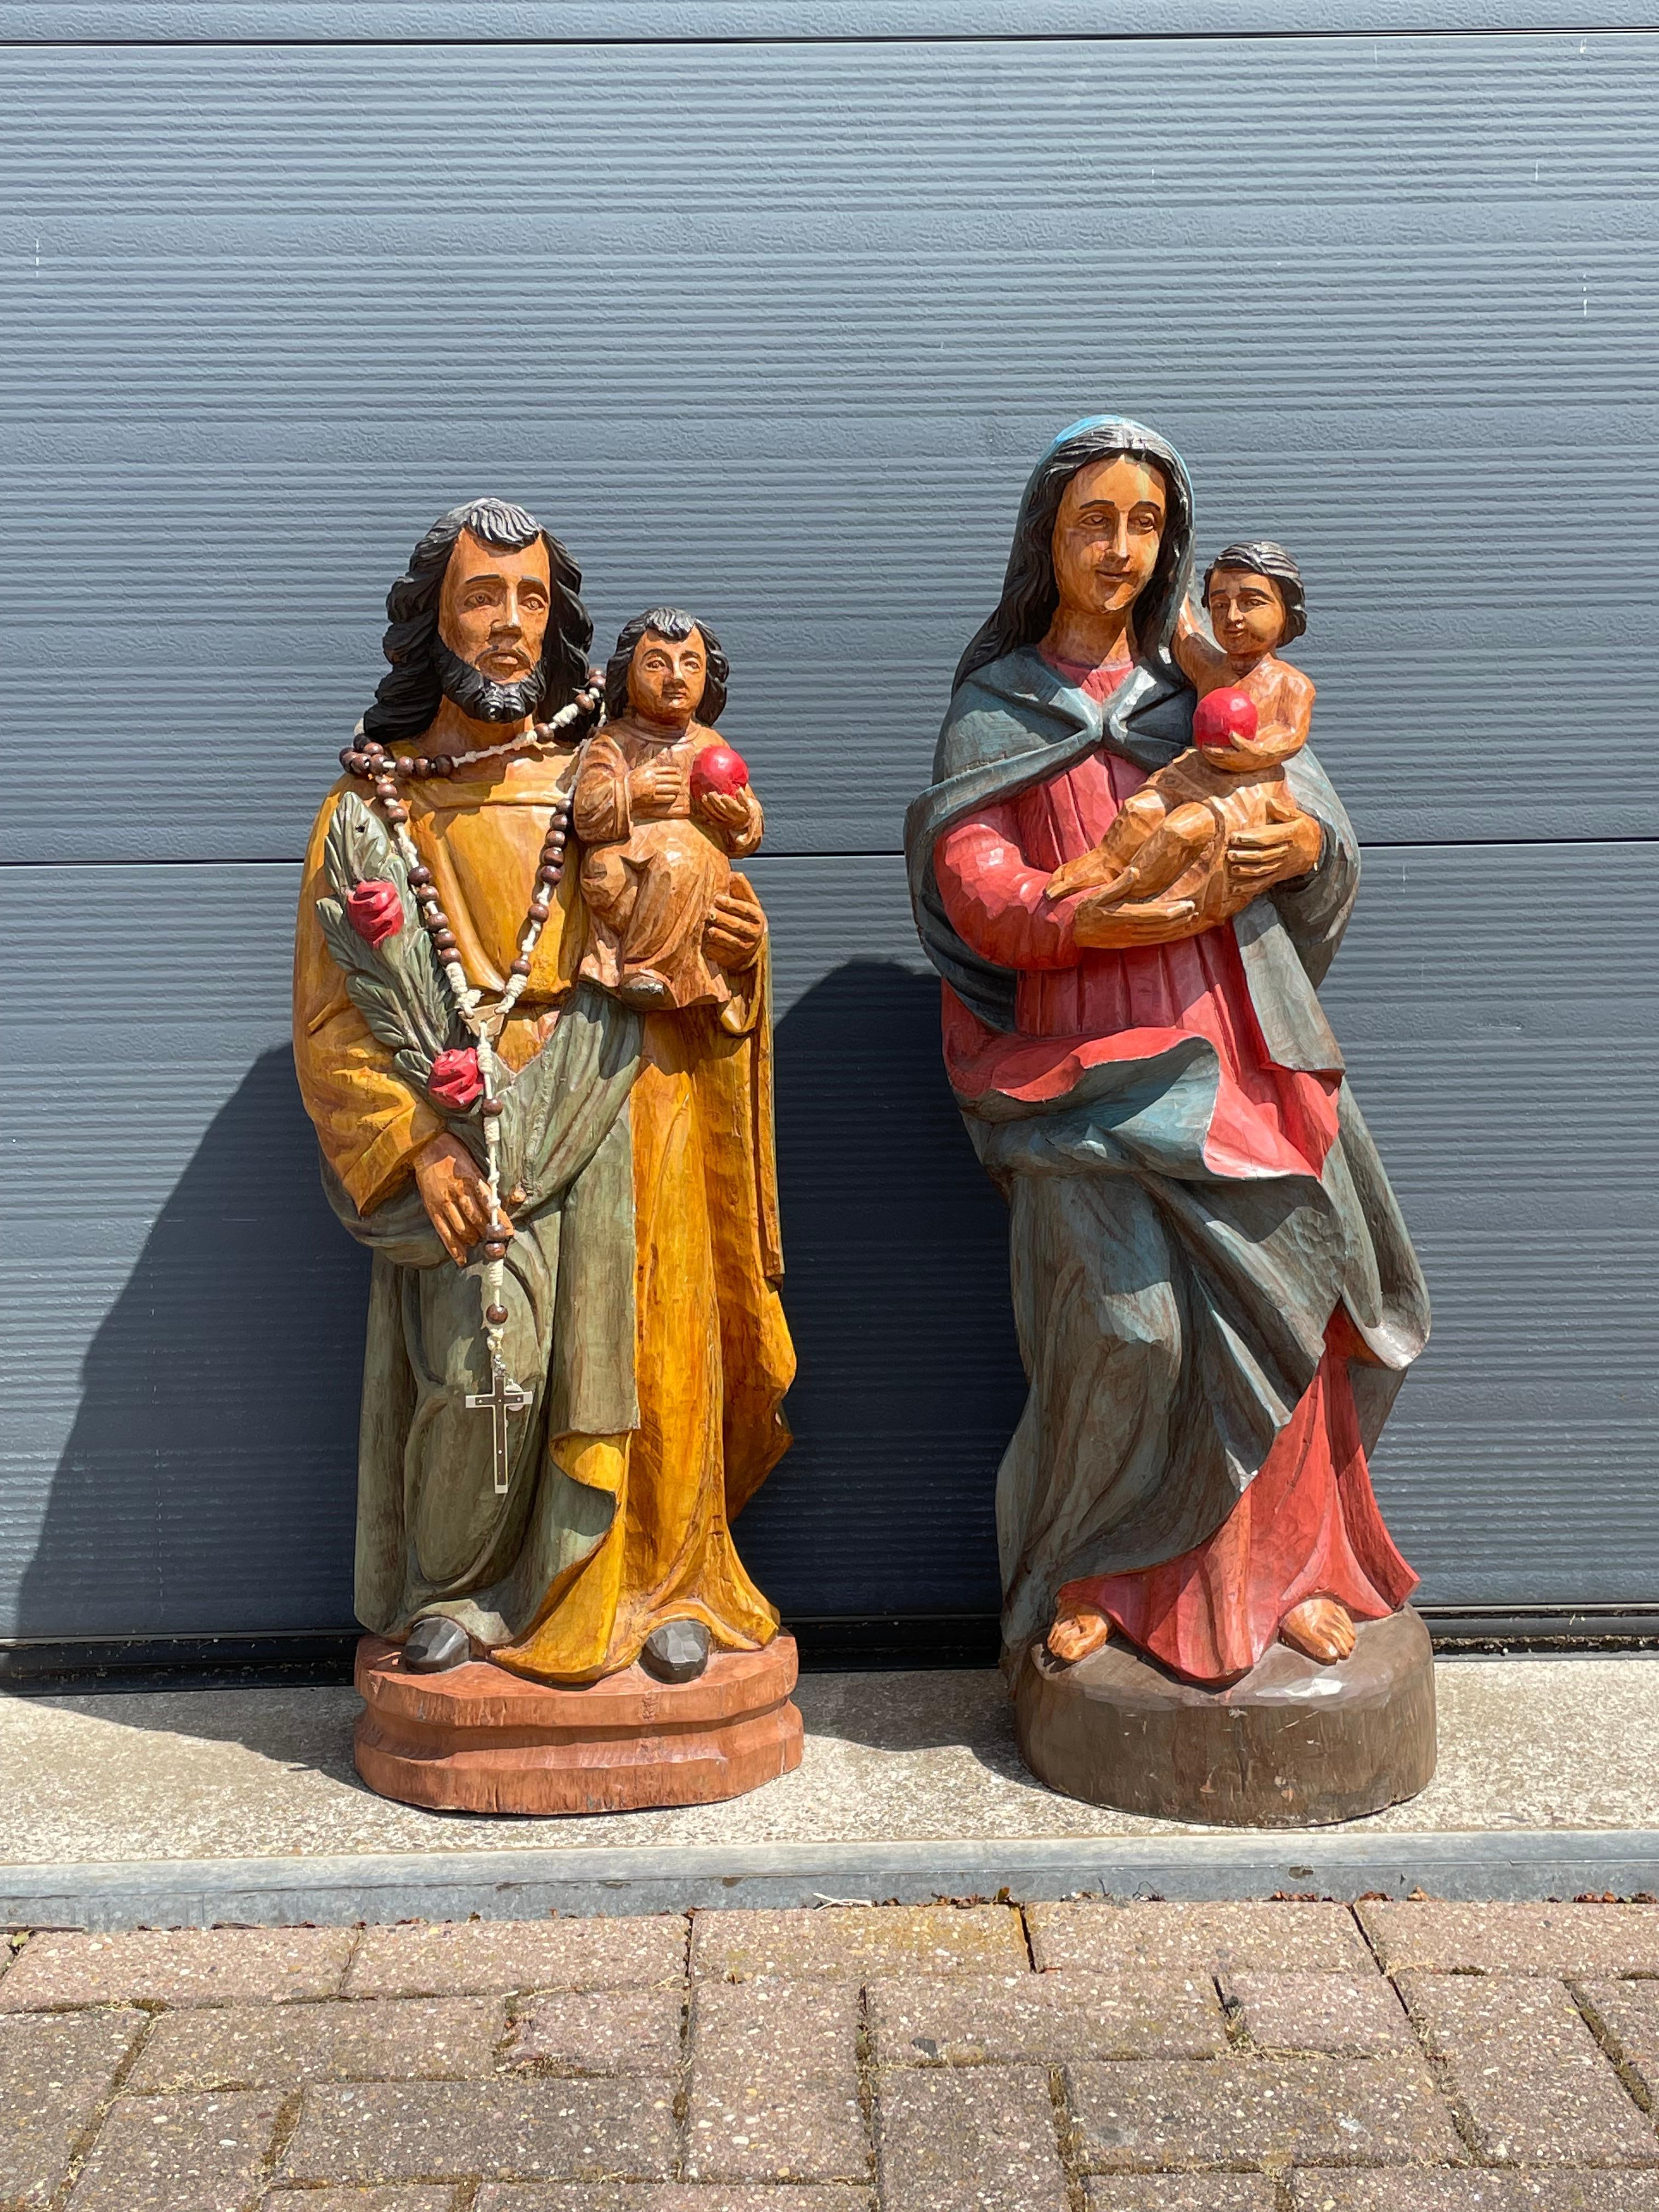 Large Pair of Hand Carved Wooden Mary & Joseph Sculptures, Both with Child Jesus im Angebot 5